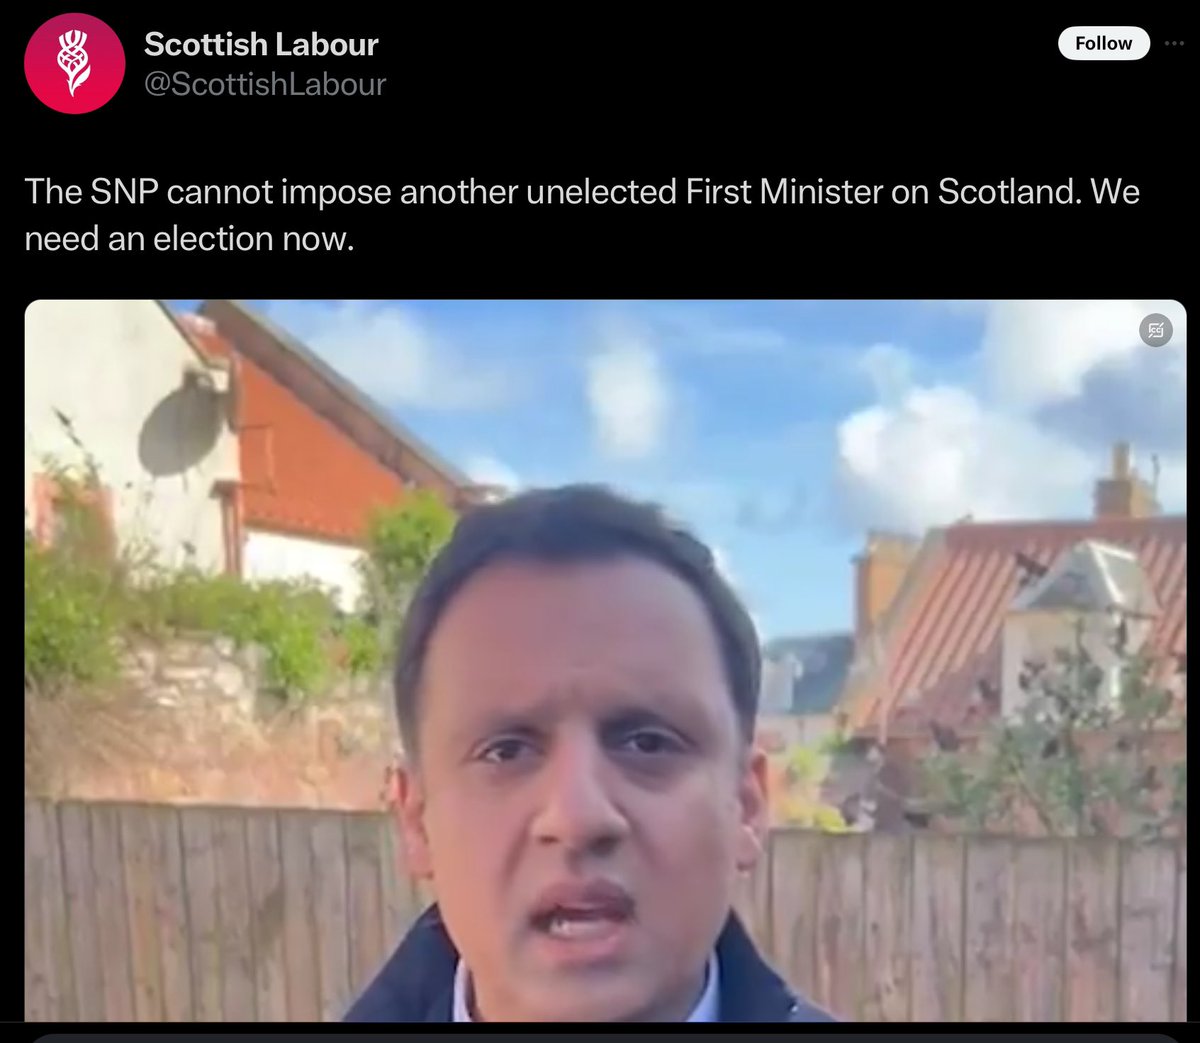 This is constitutionally illiterate. We live in a parliamentary not a presidential system. We don’t “elect” First Ministers but governments. And a reminder: Labour “imposed” an “unelected” First Minister in Wales two weeks ago.